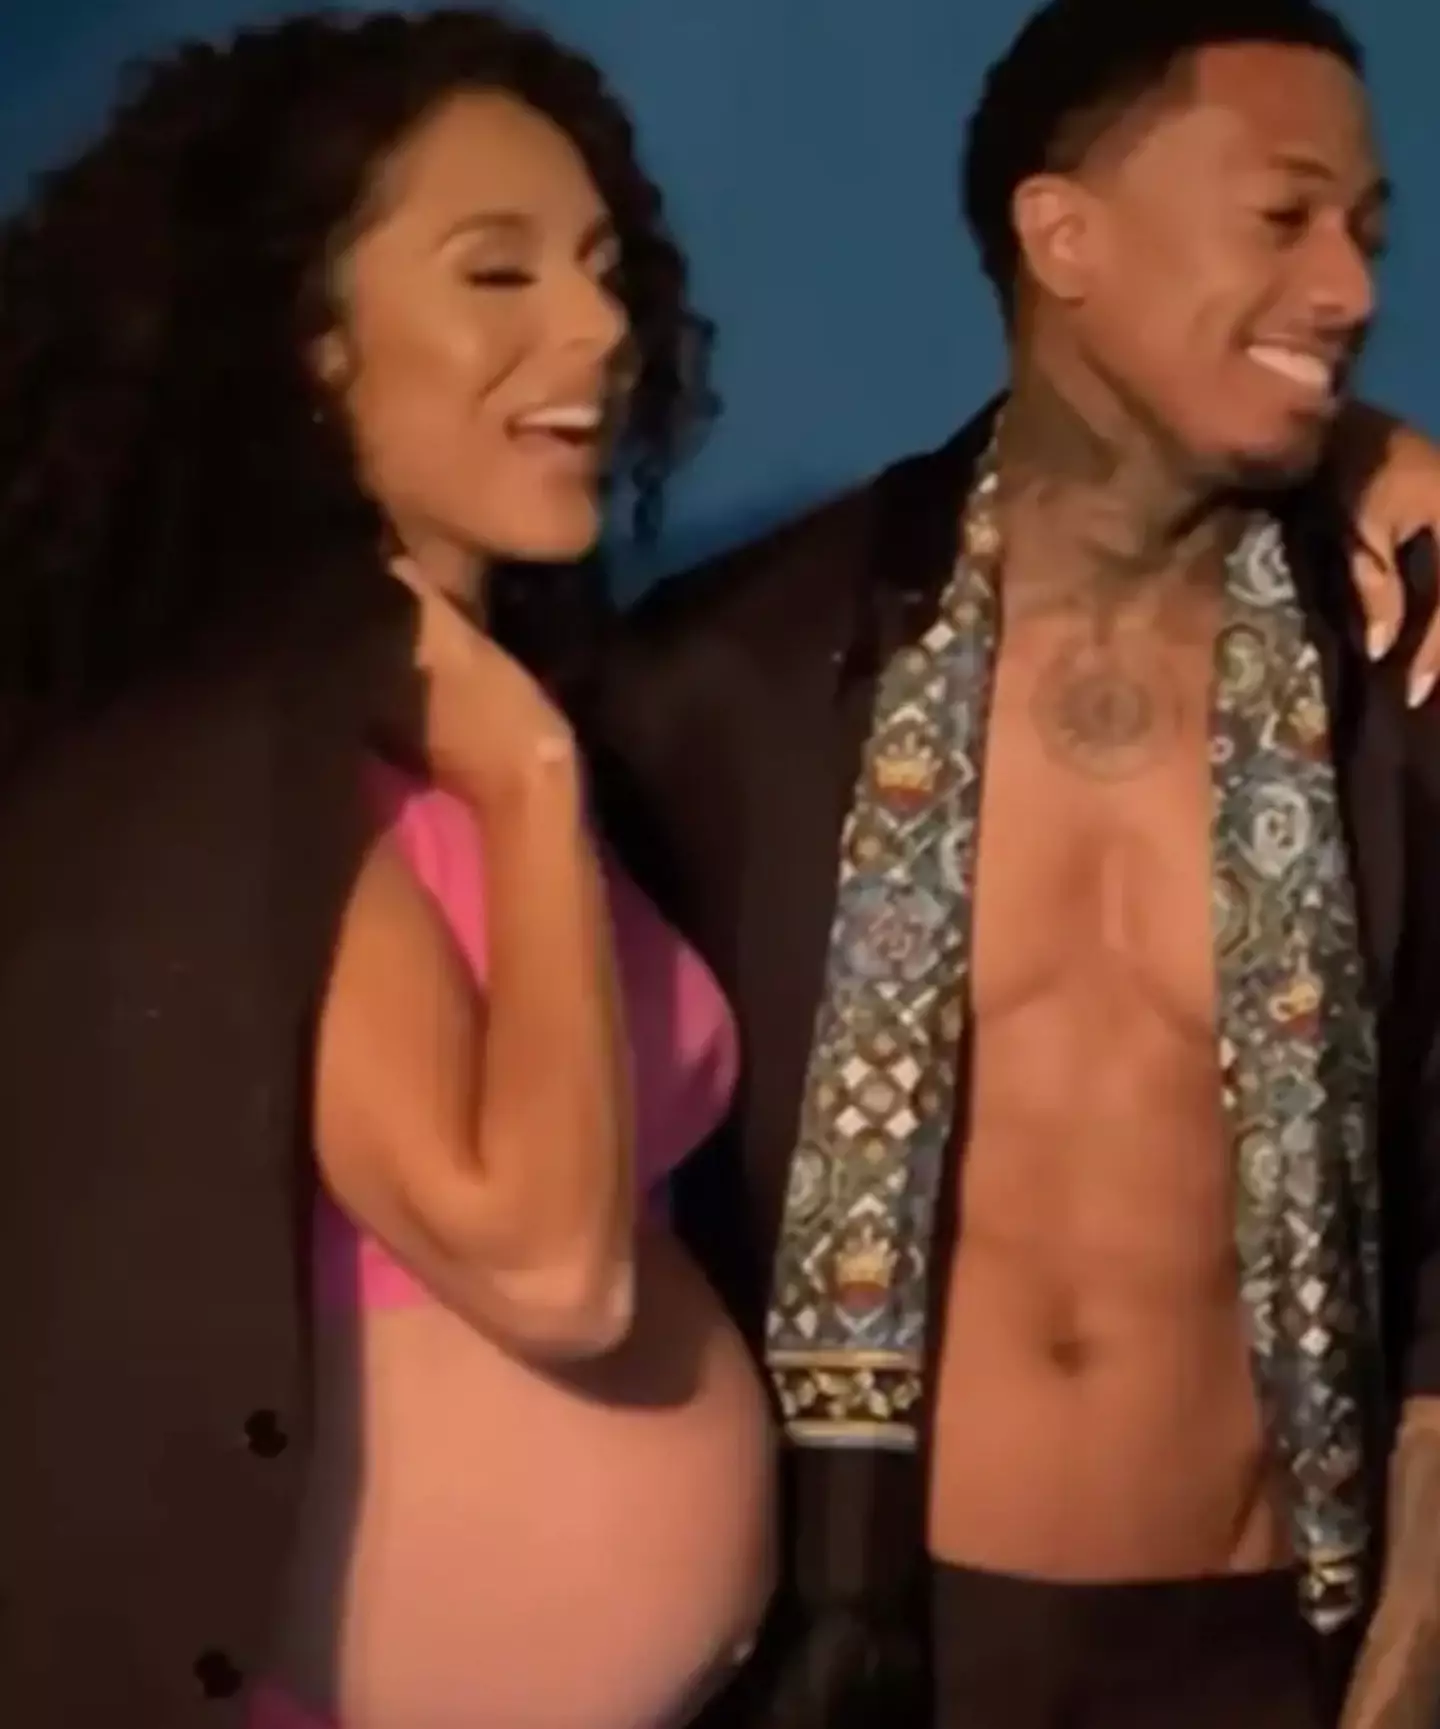 Nick Cannon and Brittany Bell have welcomed their third child into the world together.